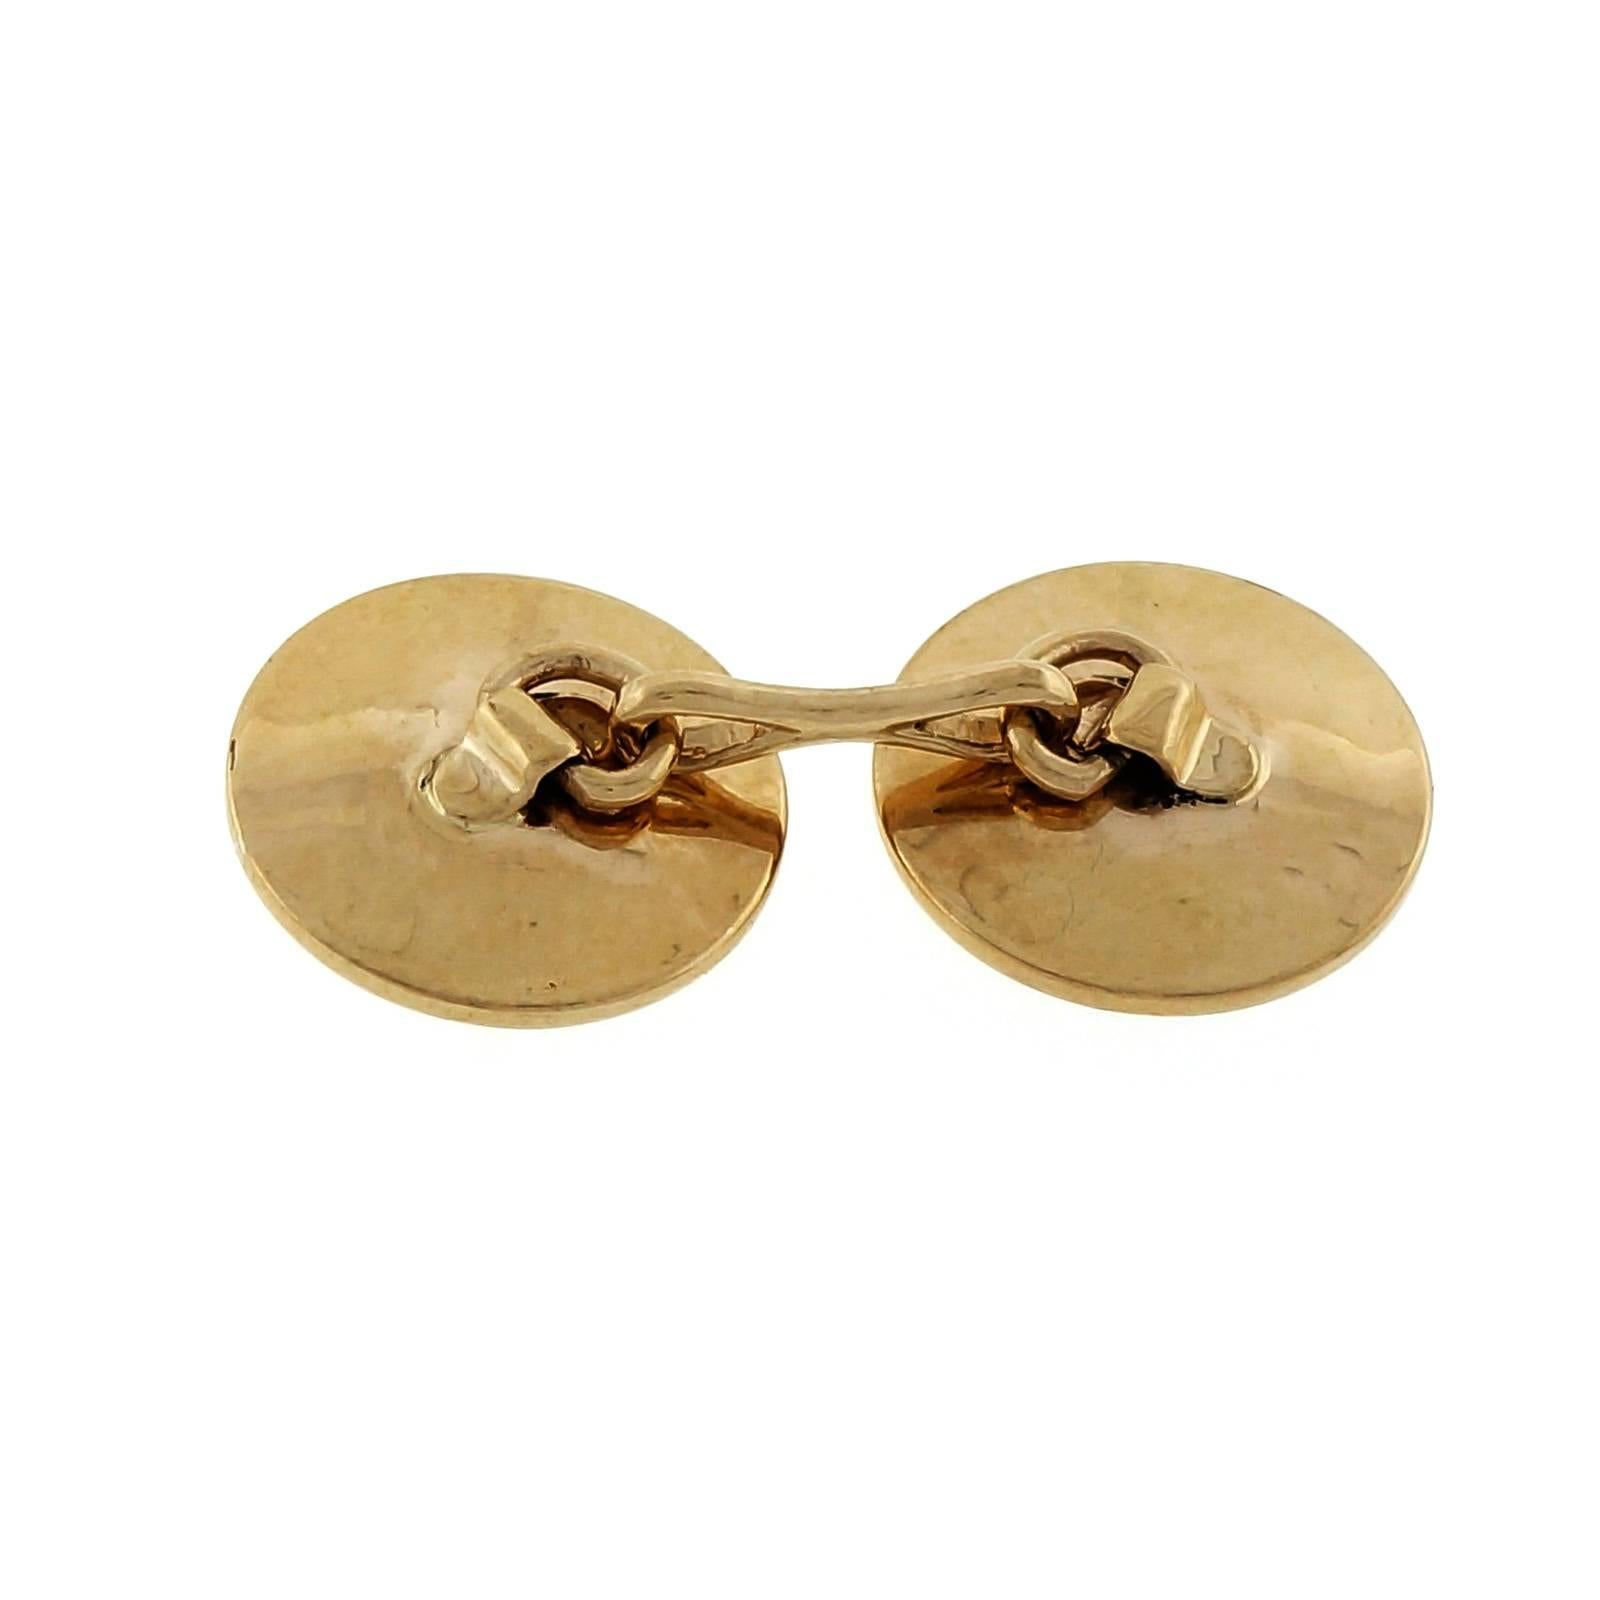 Double sided 1950 button style hand textured 14k yellow gold cufflinks.

14k yellow gold
Tested and stamped: 14k
9.6 grams
Top to bottom: 14.31mm or .57 inch
Width: 14.31mm or .57 inch
Depth: 3.04mm
